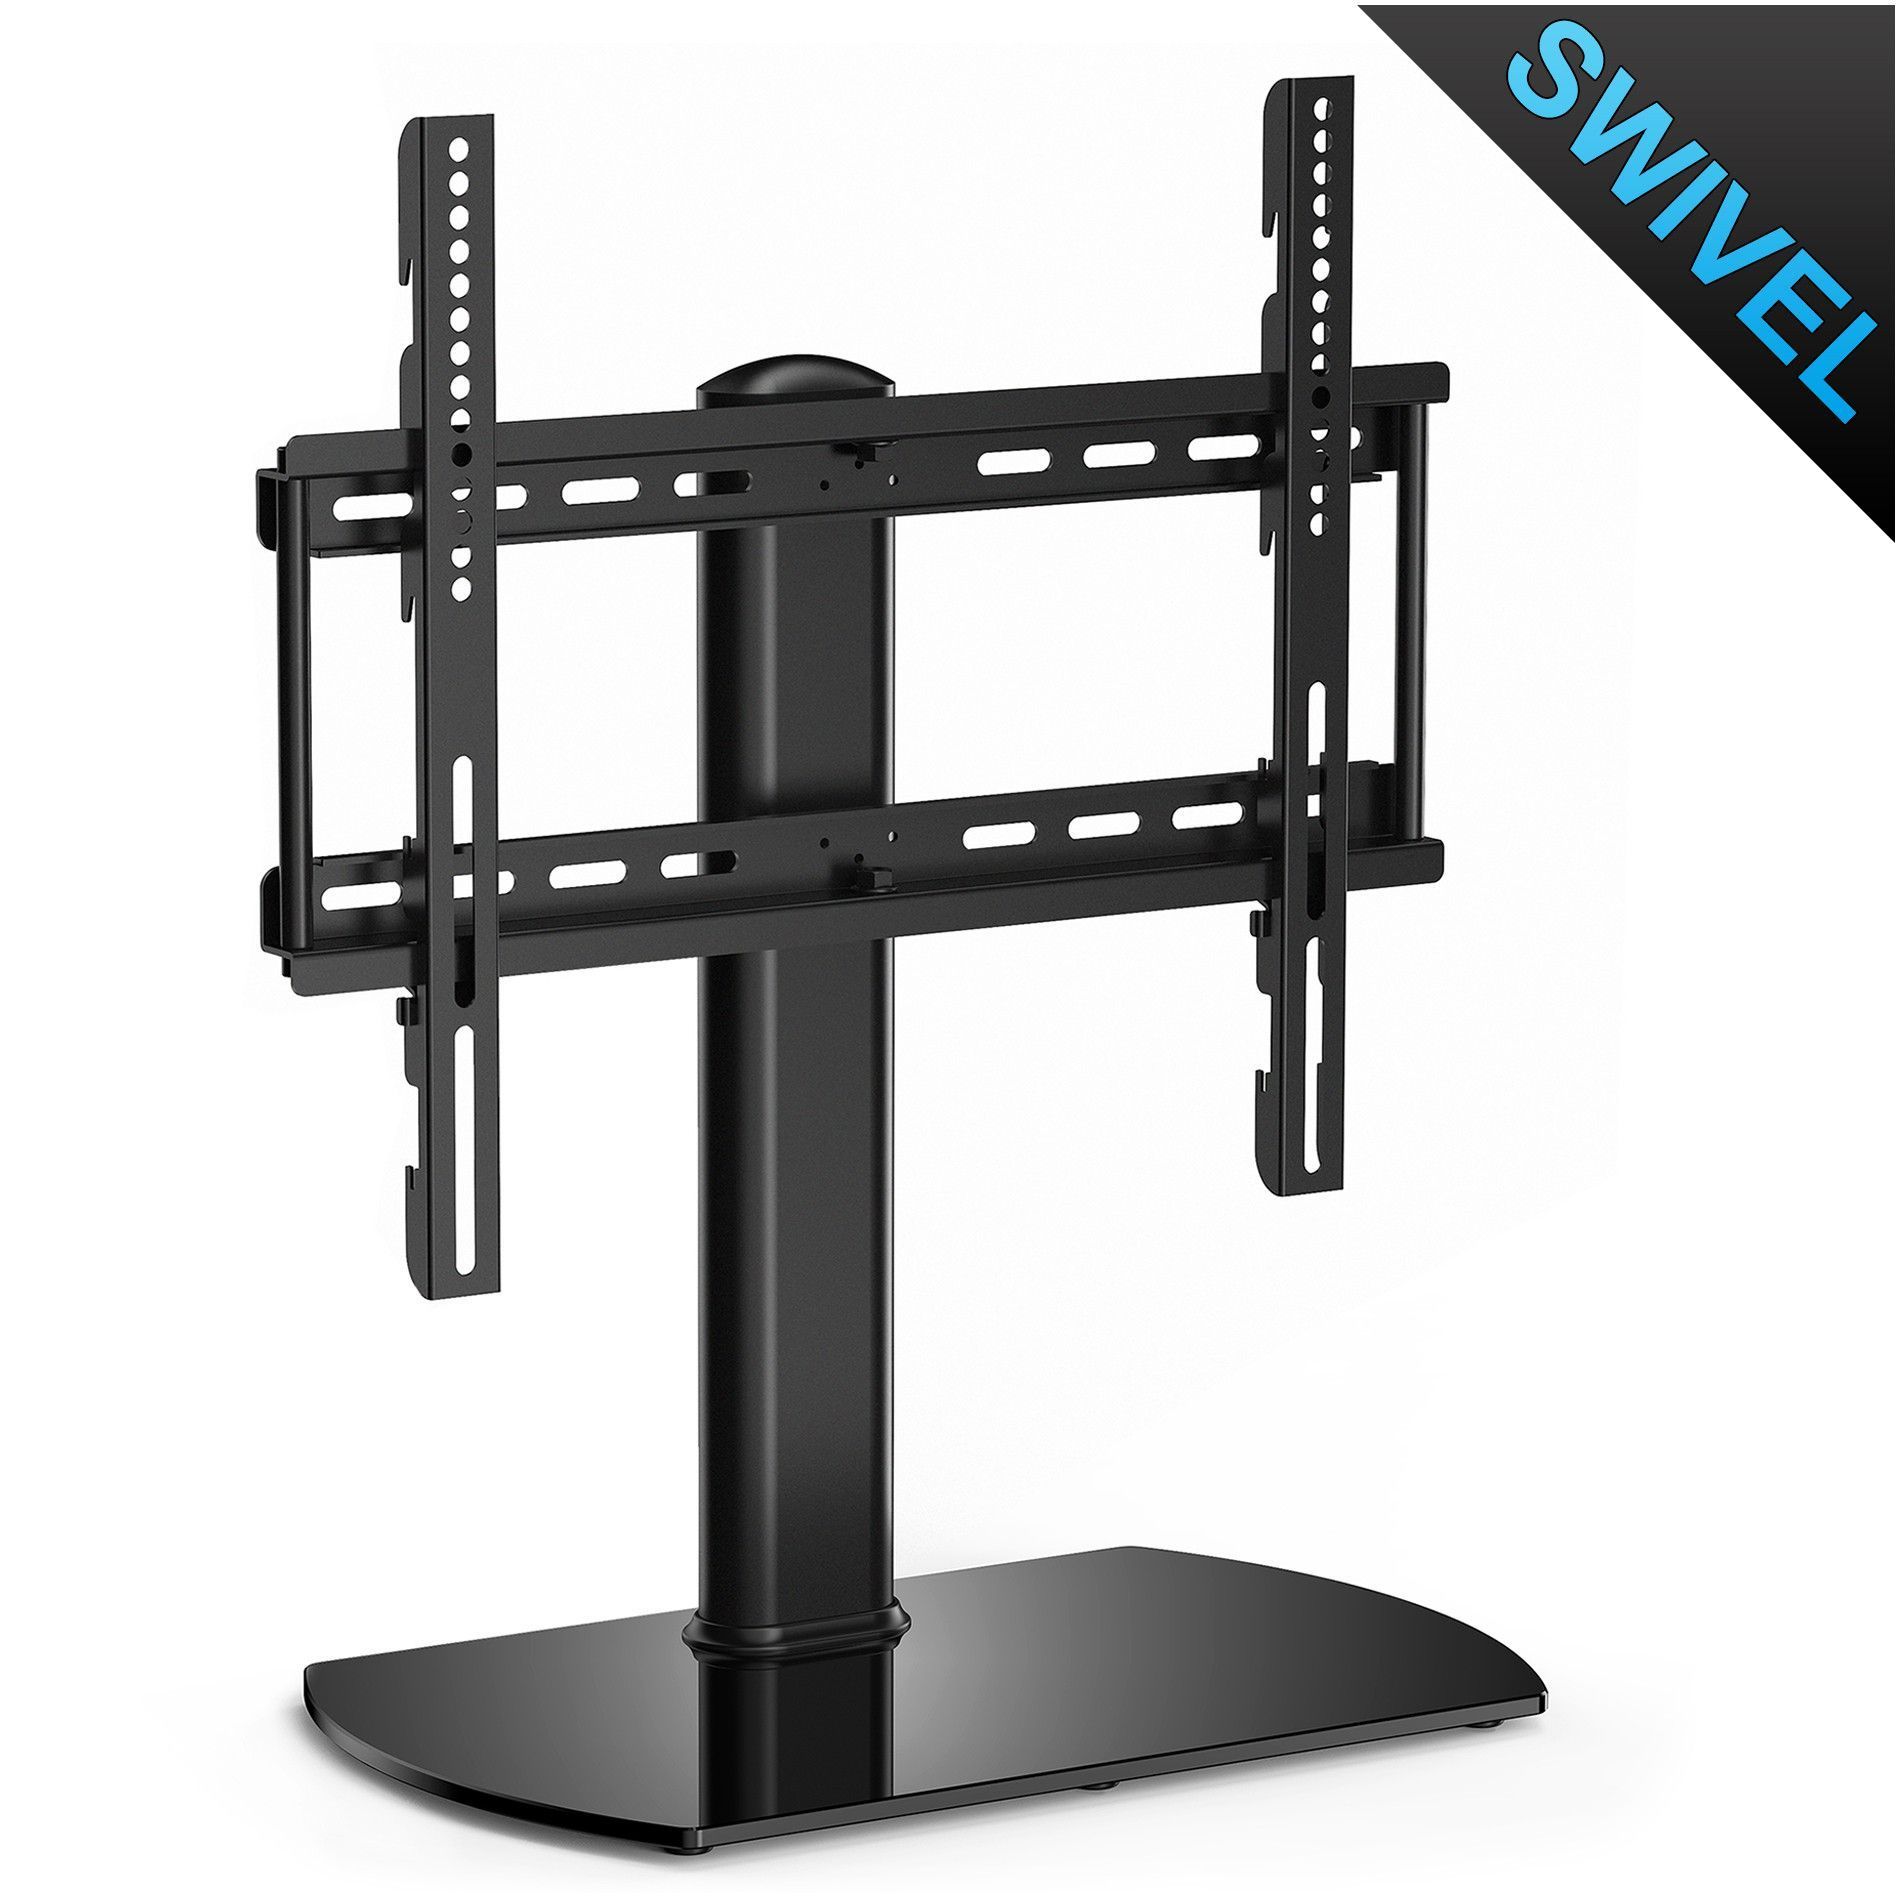 Fitueyes Universal Tabletop Tv Stand Pedestal Base Wall Regarding Modern Black Universal Tabletop Tv Stands (View 5 of 15)